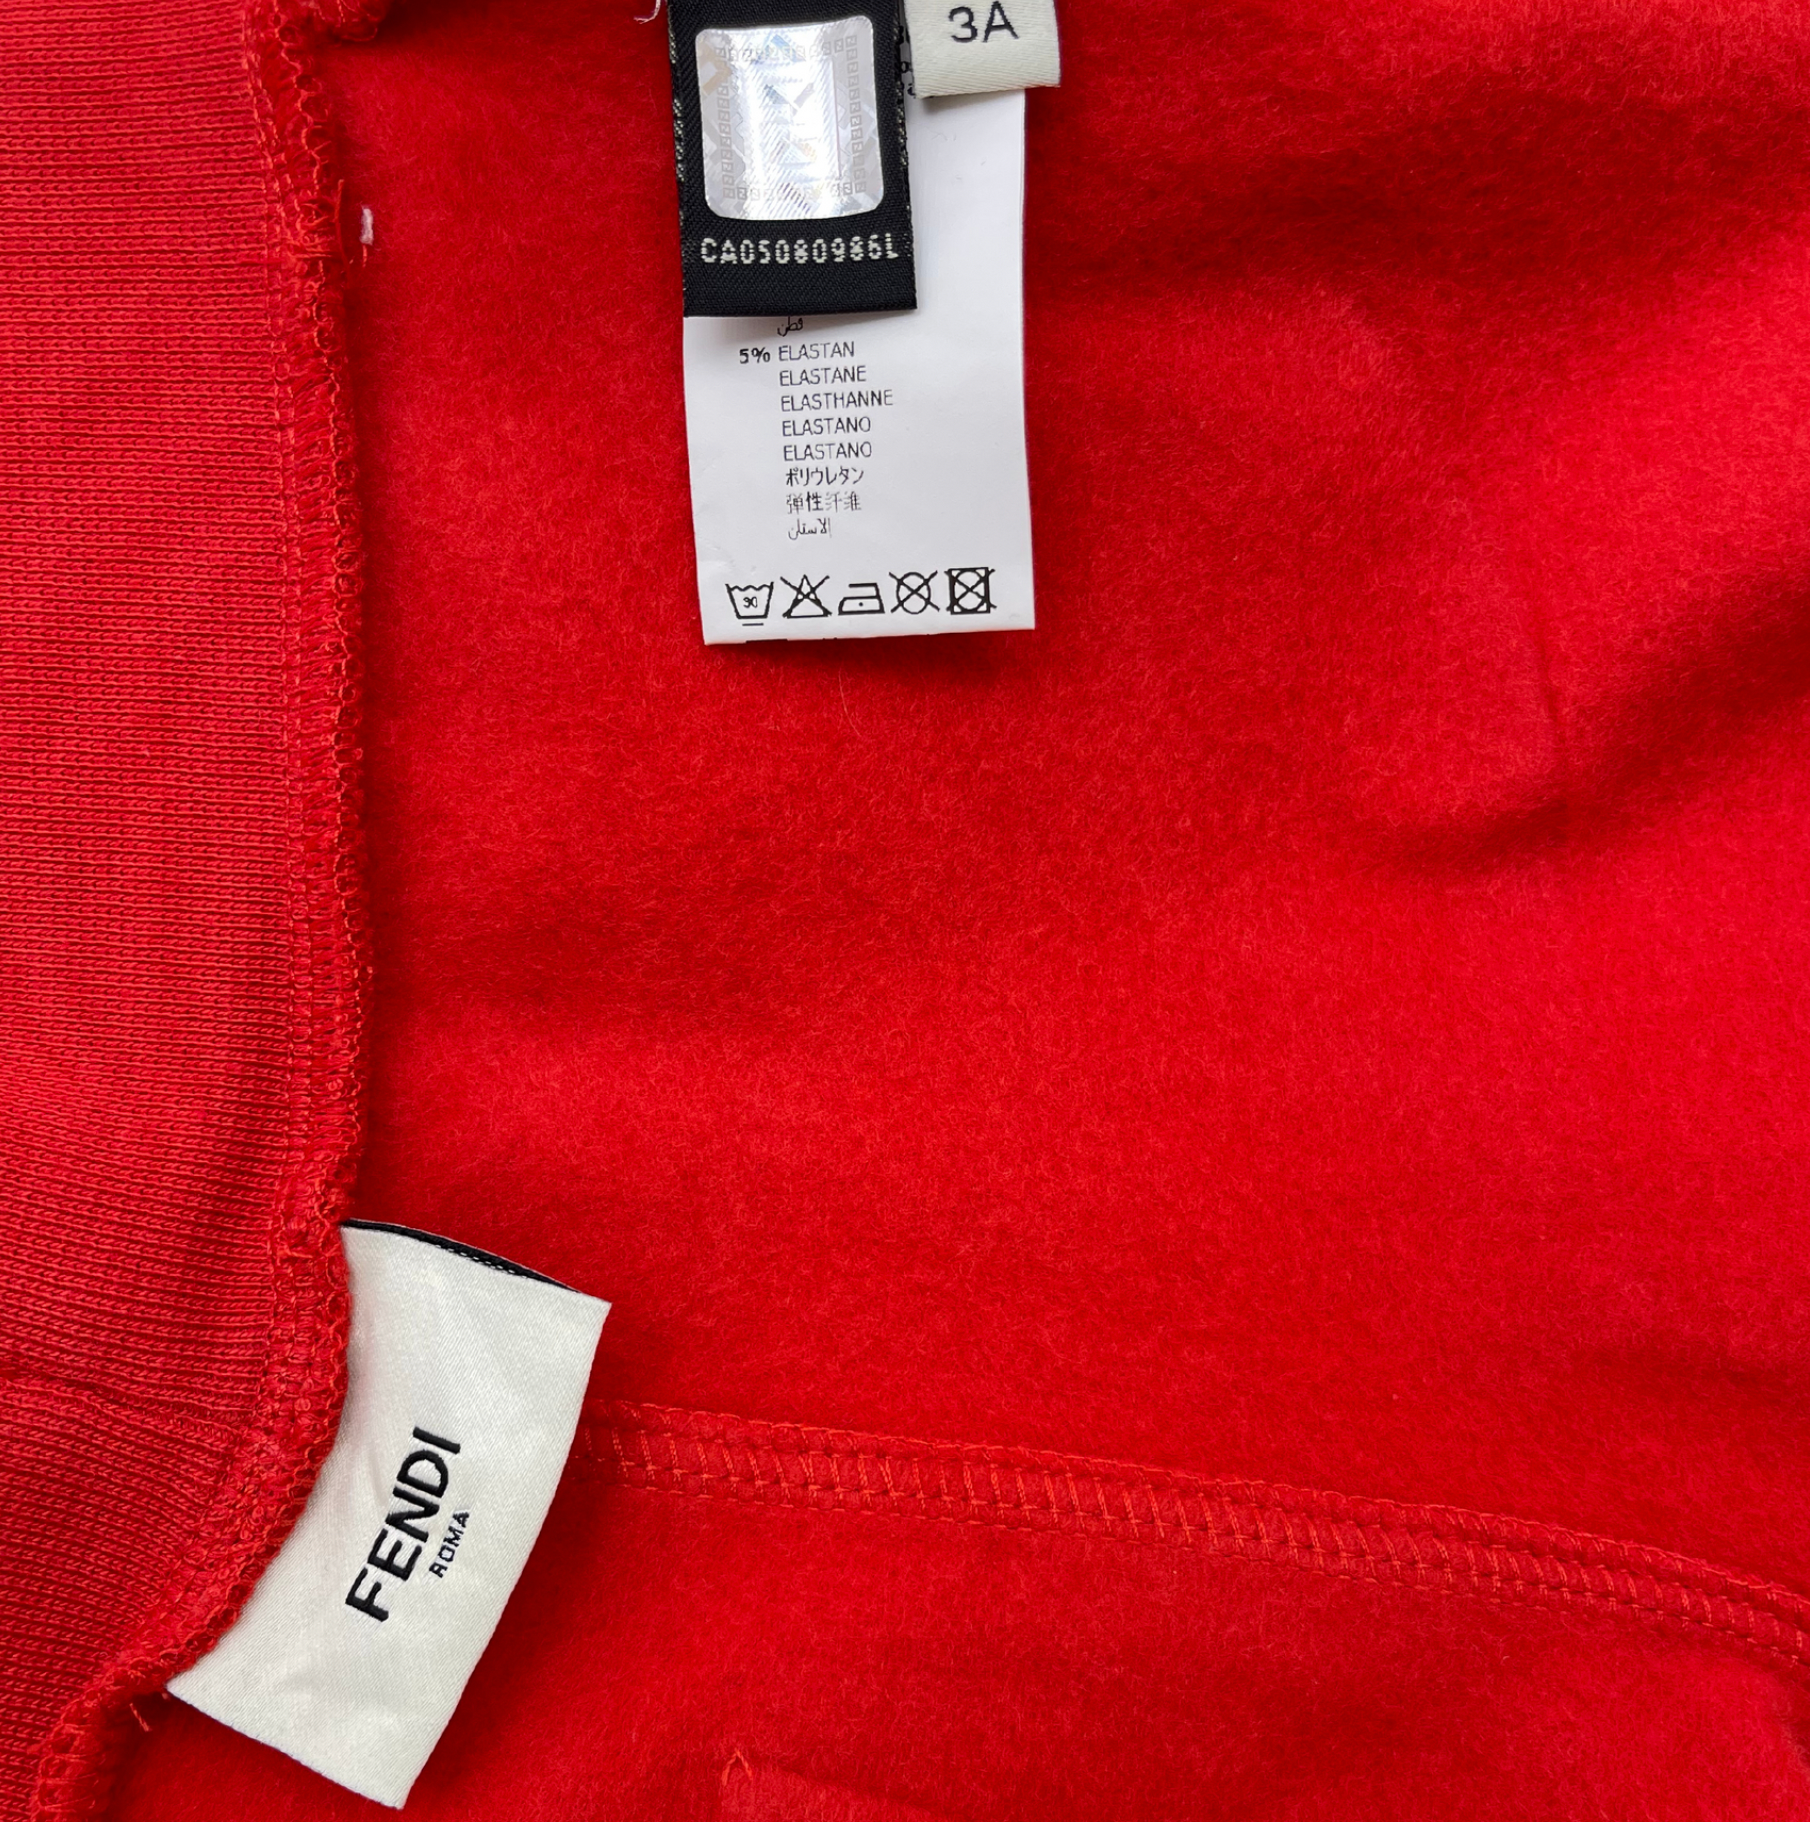 FENDI - Red joggers - 3 years old